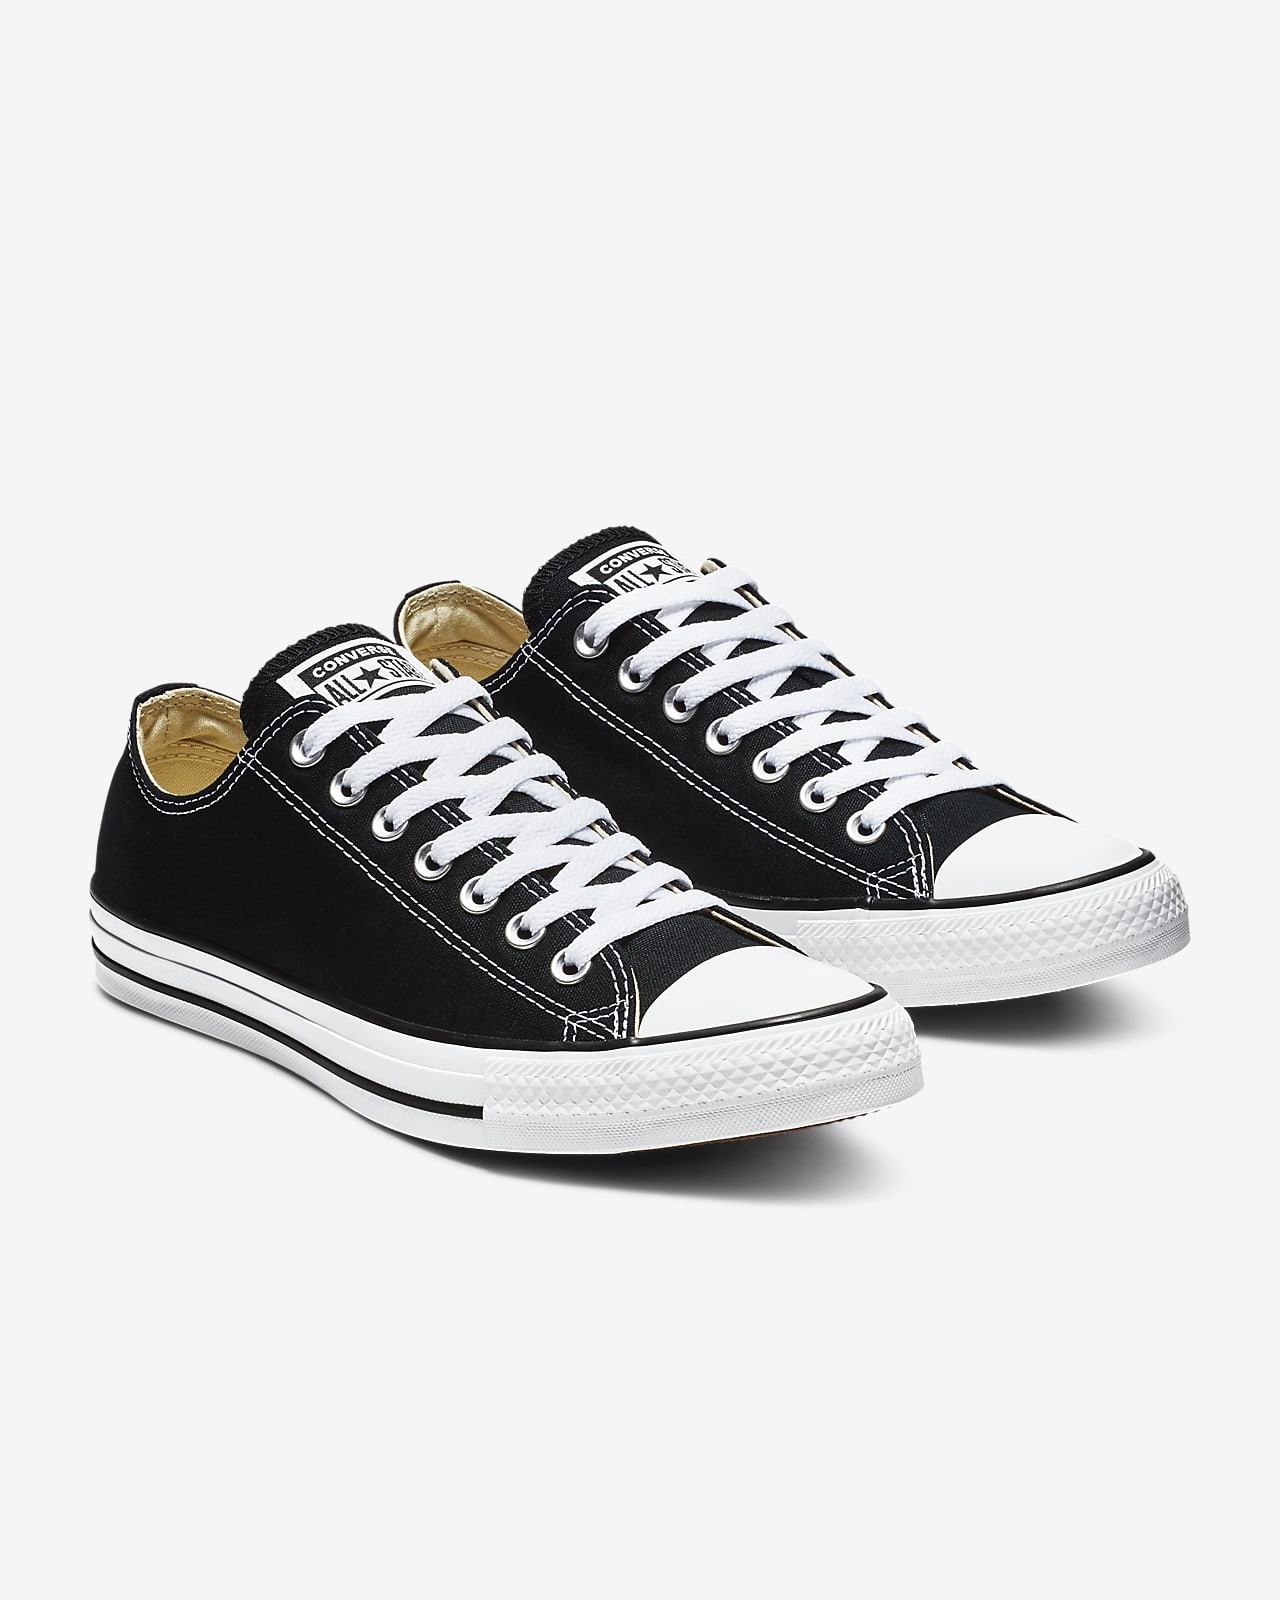 Converse Chuck Taylor All Star Low Top Shoes وجه رسم